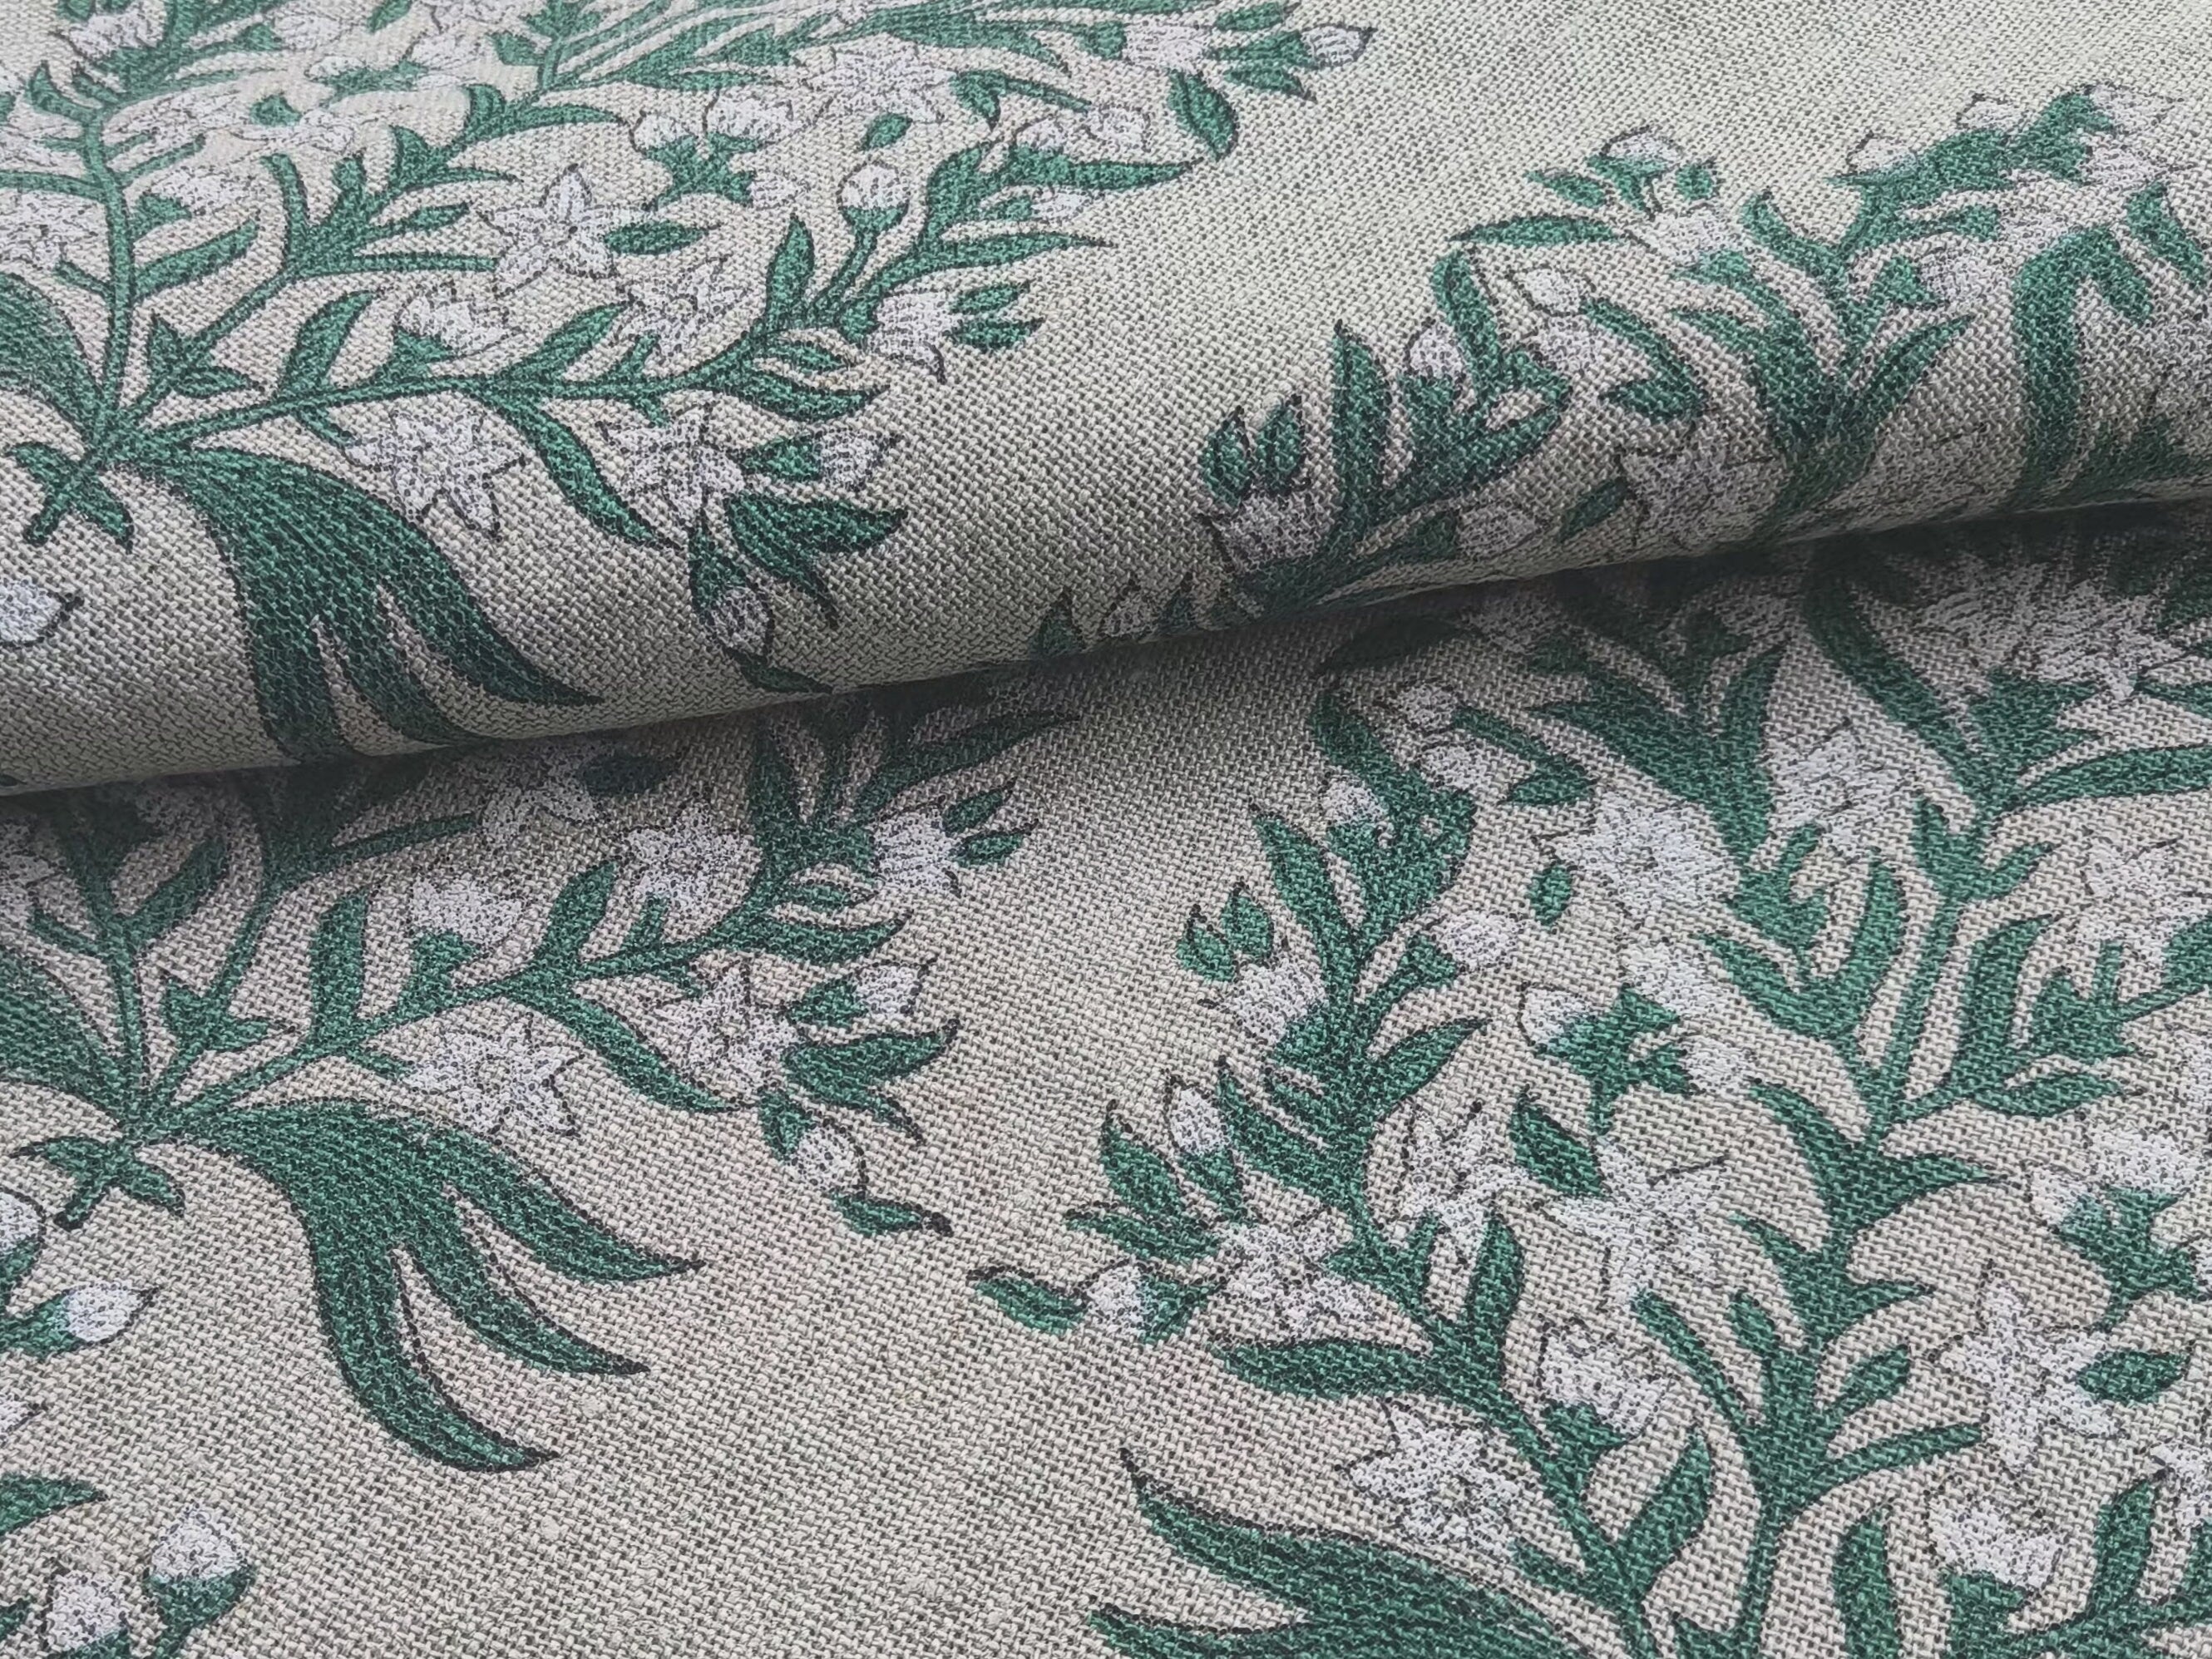 Block Print Linen Fabric, Vrindavan Flowergreenblock Print Fabric, Floral Print Linen, By The Yards, Pillow Cover Fabric For Tablecloth, Thick Linen For Upholstery